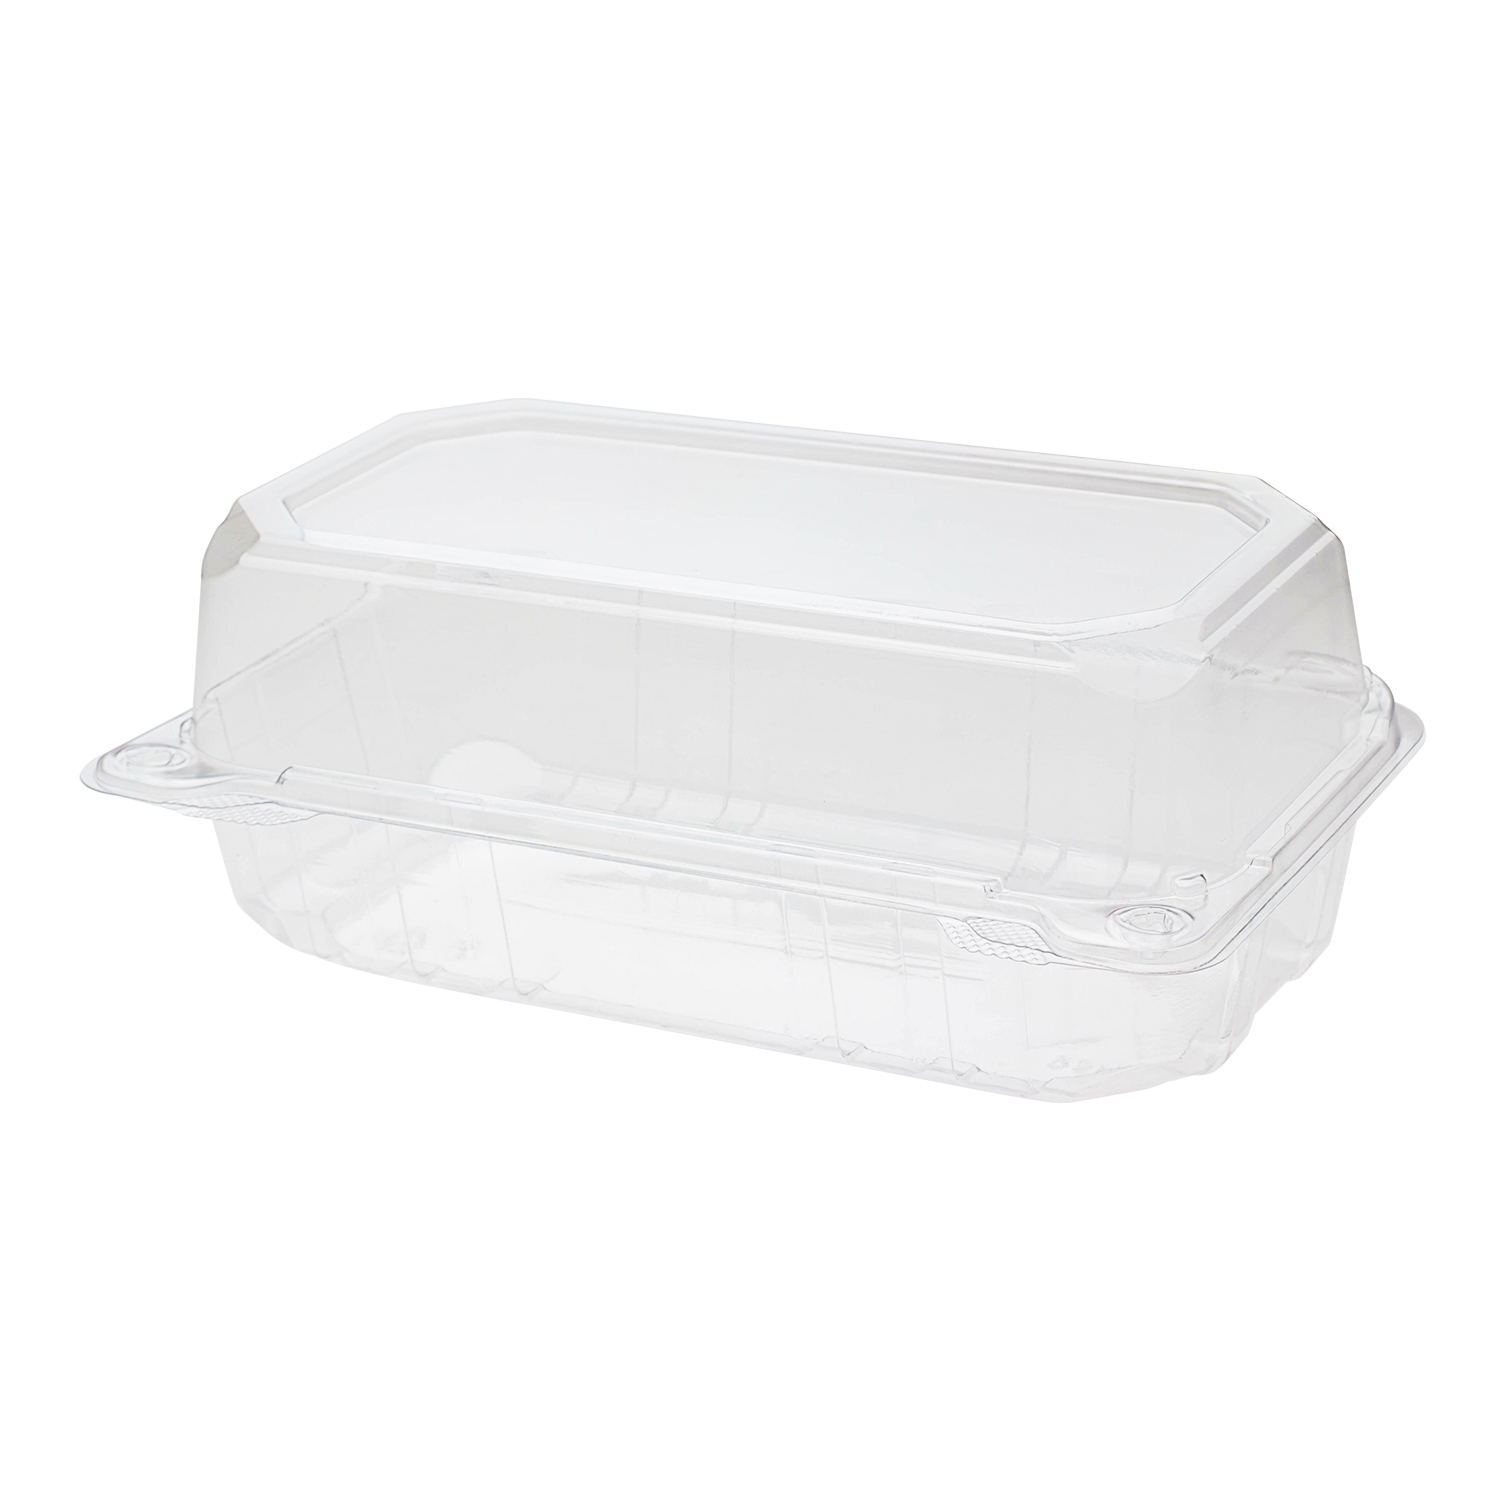 Wholesale Hinged Lid Slim Plastic Containers in Bulk